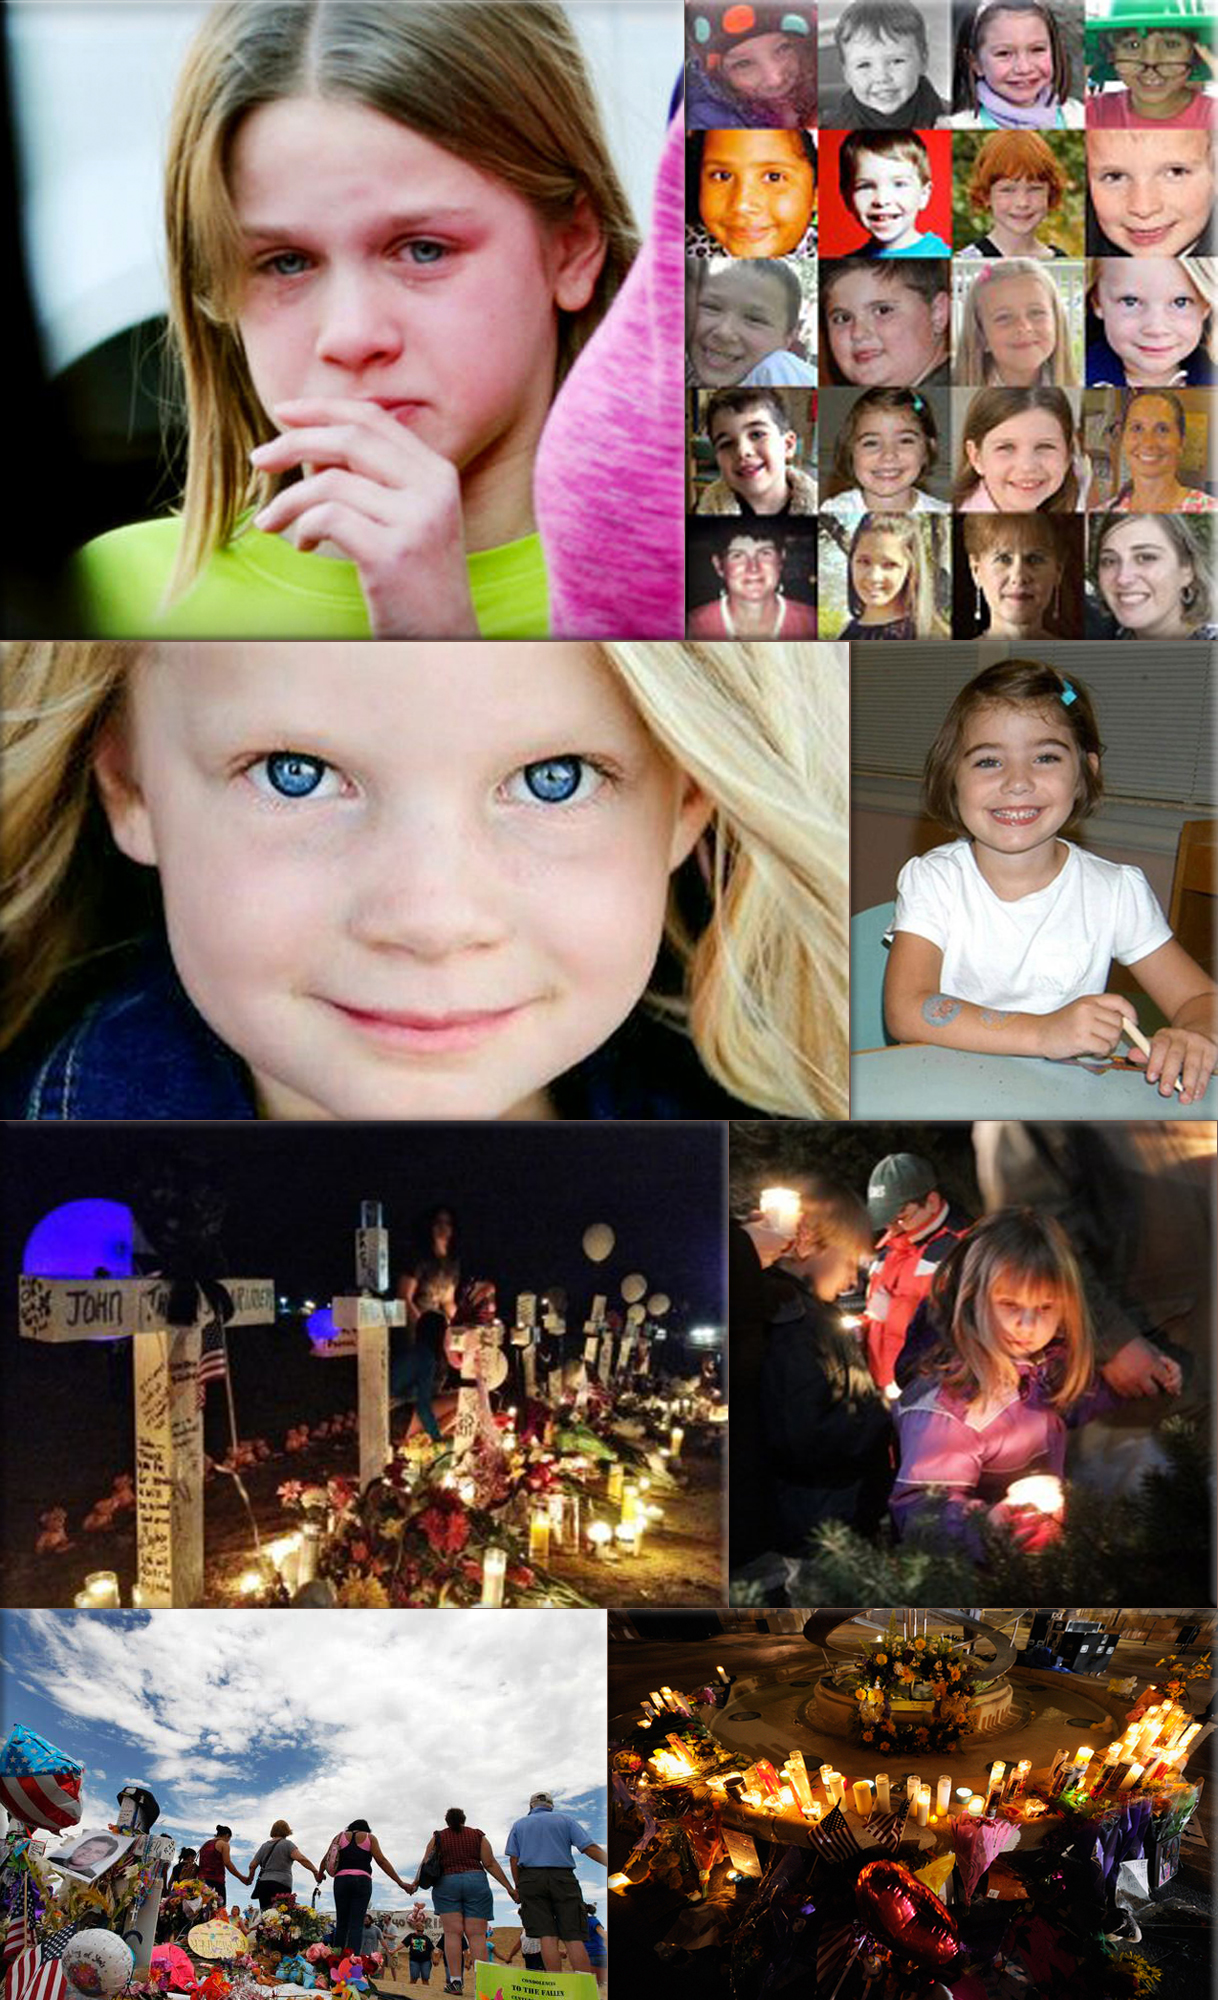 Mass murder in America: 28 people, including the gunman, were killed in a mass shooting in Sandy Hook village, Newtown, Connecticut on December 14th, 2012. ● Emilie Parker Memorial Fund/Handout, Reuters ● Caroline Previdi was one of 20 children killed at a Connecticut elementary school on Friday in one of the worst mass shootings in U.S. history. Reuters ● The Hill of Crosses, Jane Cowan ABC News ● Newtown, Connecticut KDRV ● A group of people hold hands and pray at a memorial across from the Colorado theater where a gunman killed 12 and wounded more than 50. Alex Brandon, AP ● Mourners create a memorial at the fountain of the Aurora Municipal Center after a prayer vigil Sunday for the 12 victims of Friday's mass shooting at the Century 16 movie theater. Kevork Djansezian, Getty Images